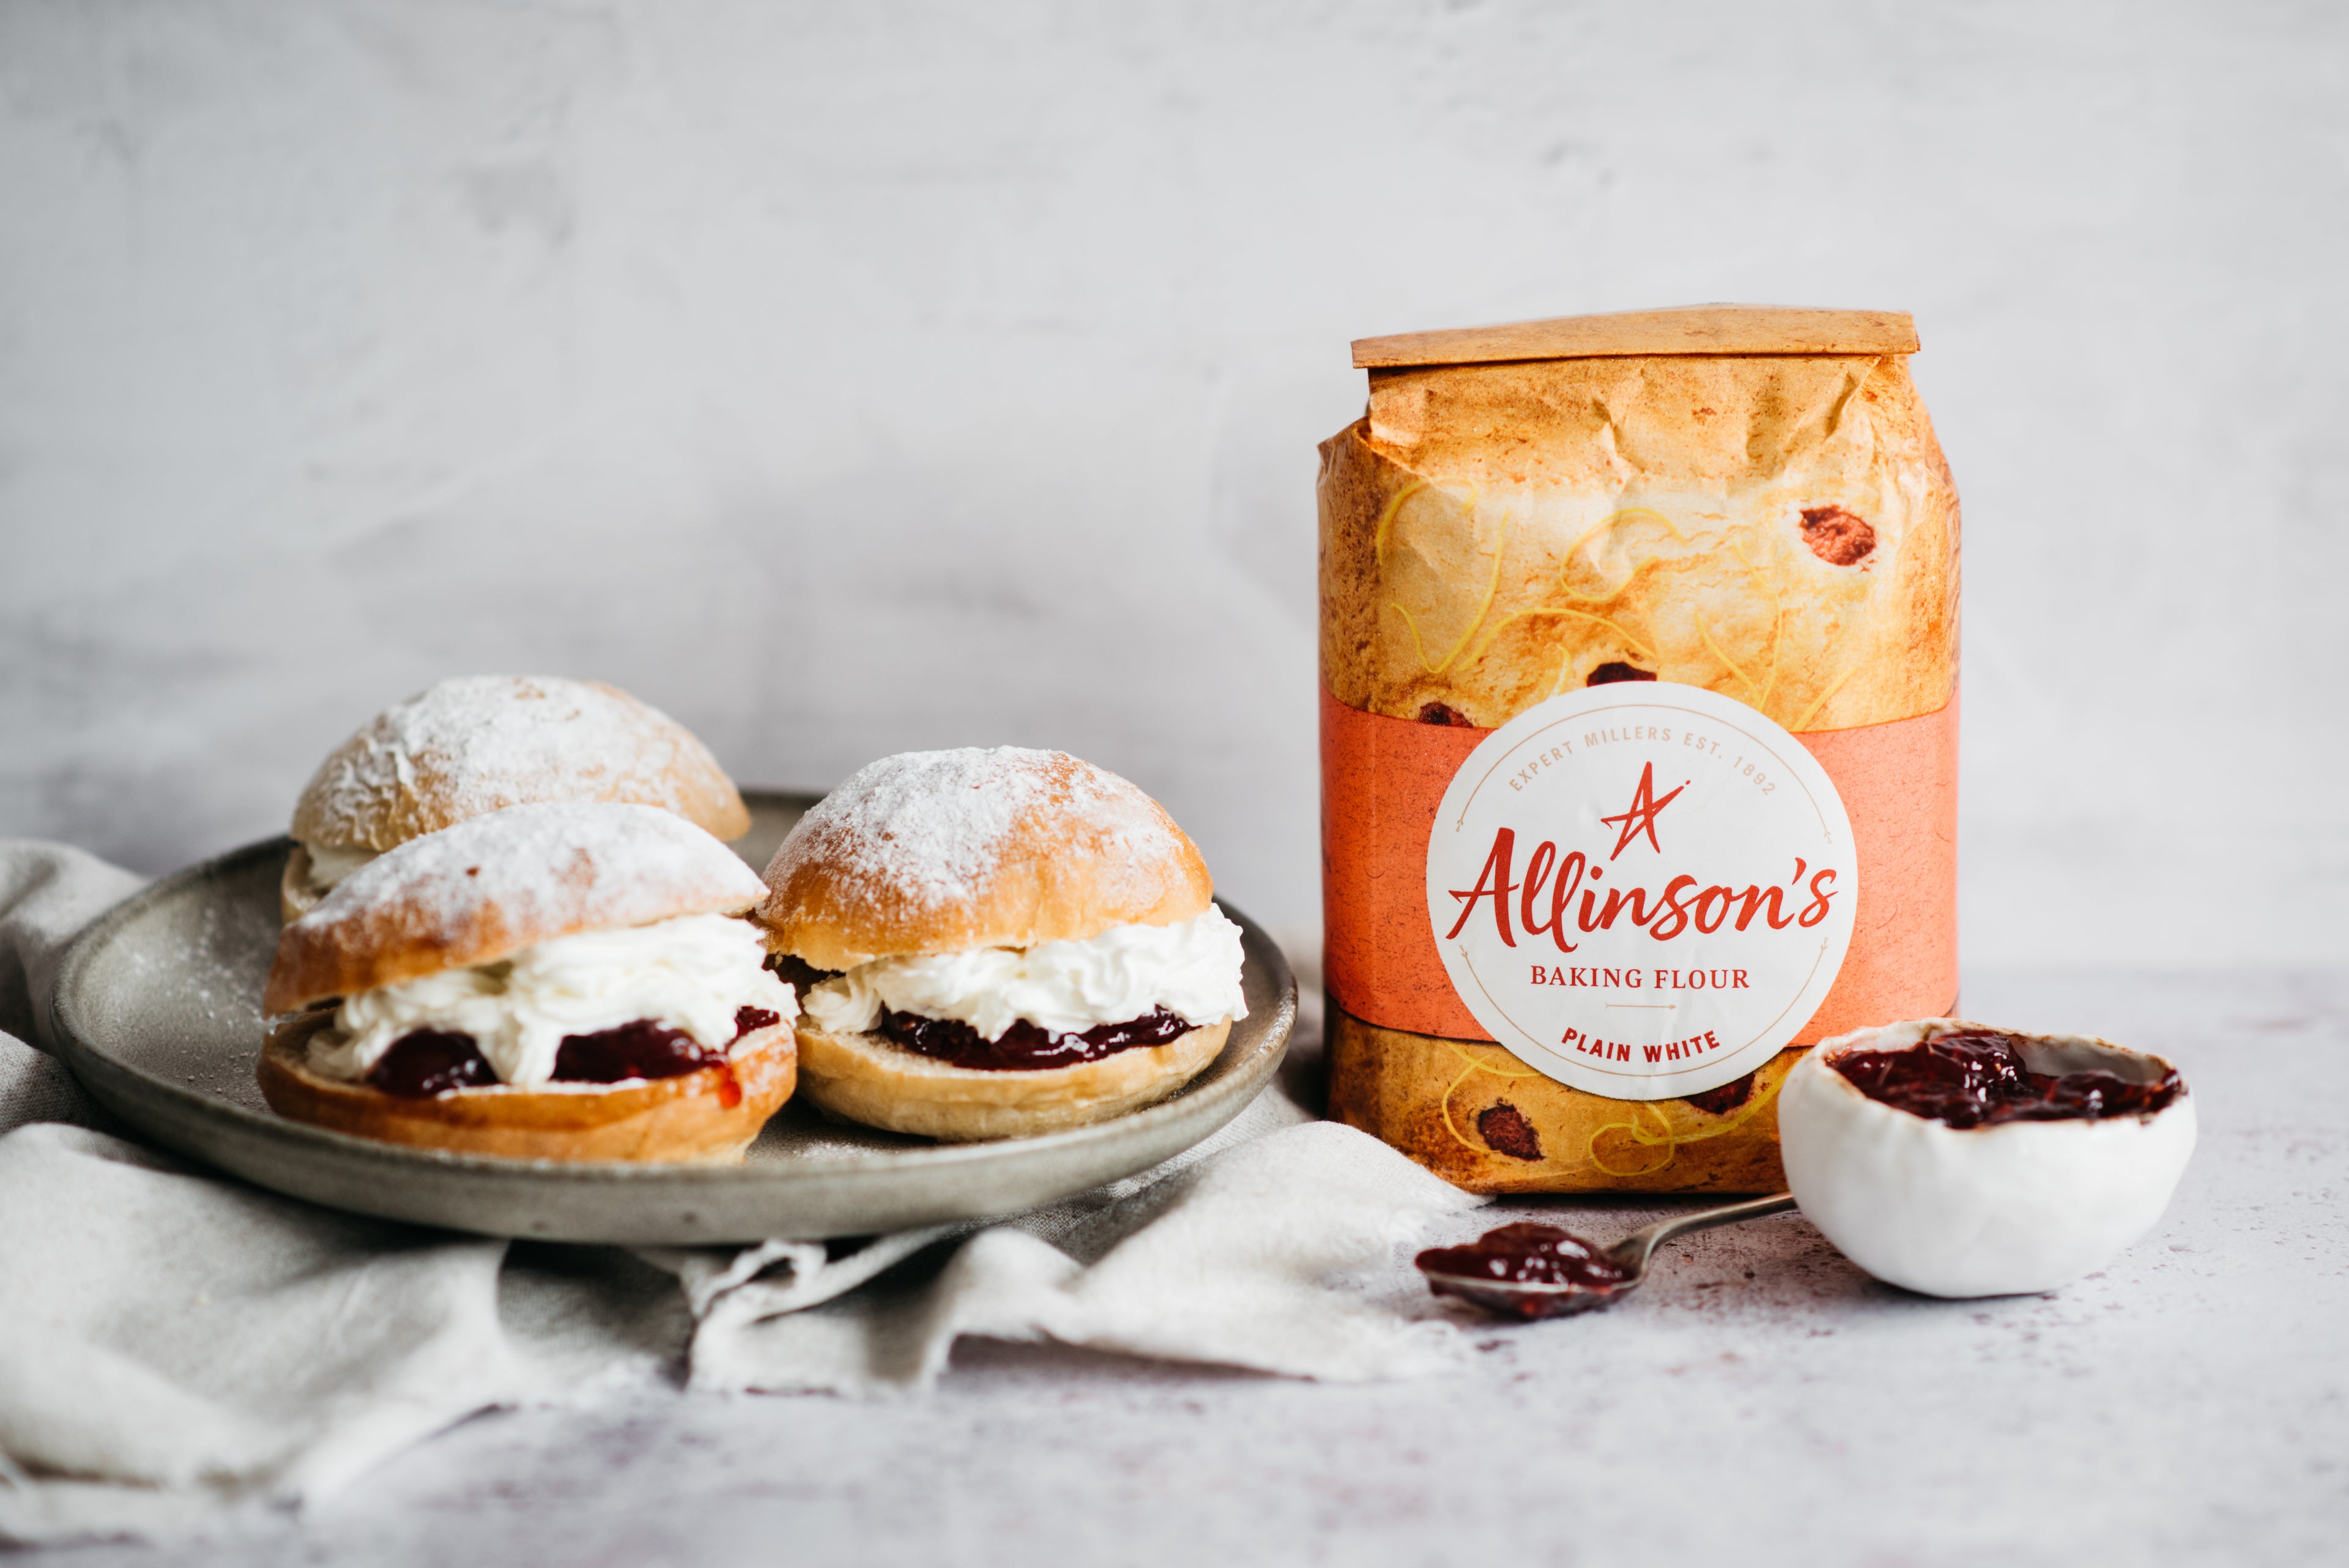 Plate of Devonshire Splits next to a bag of Allinson's plain white flour, with a bowl of jam and a spoon